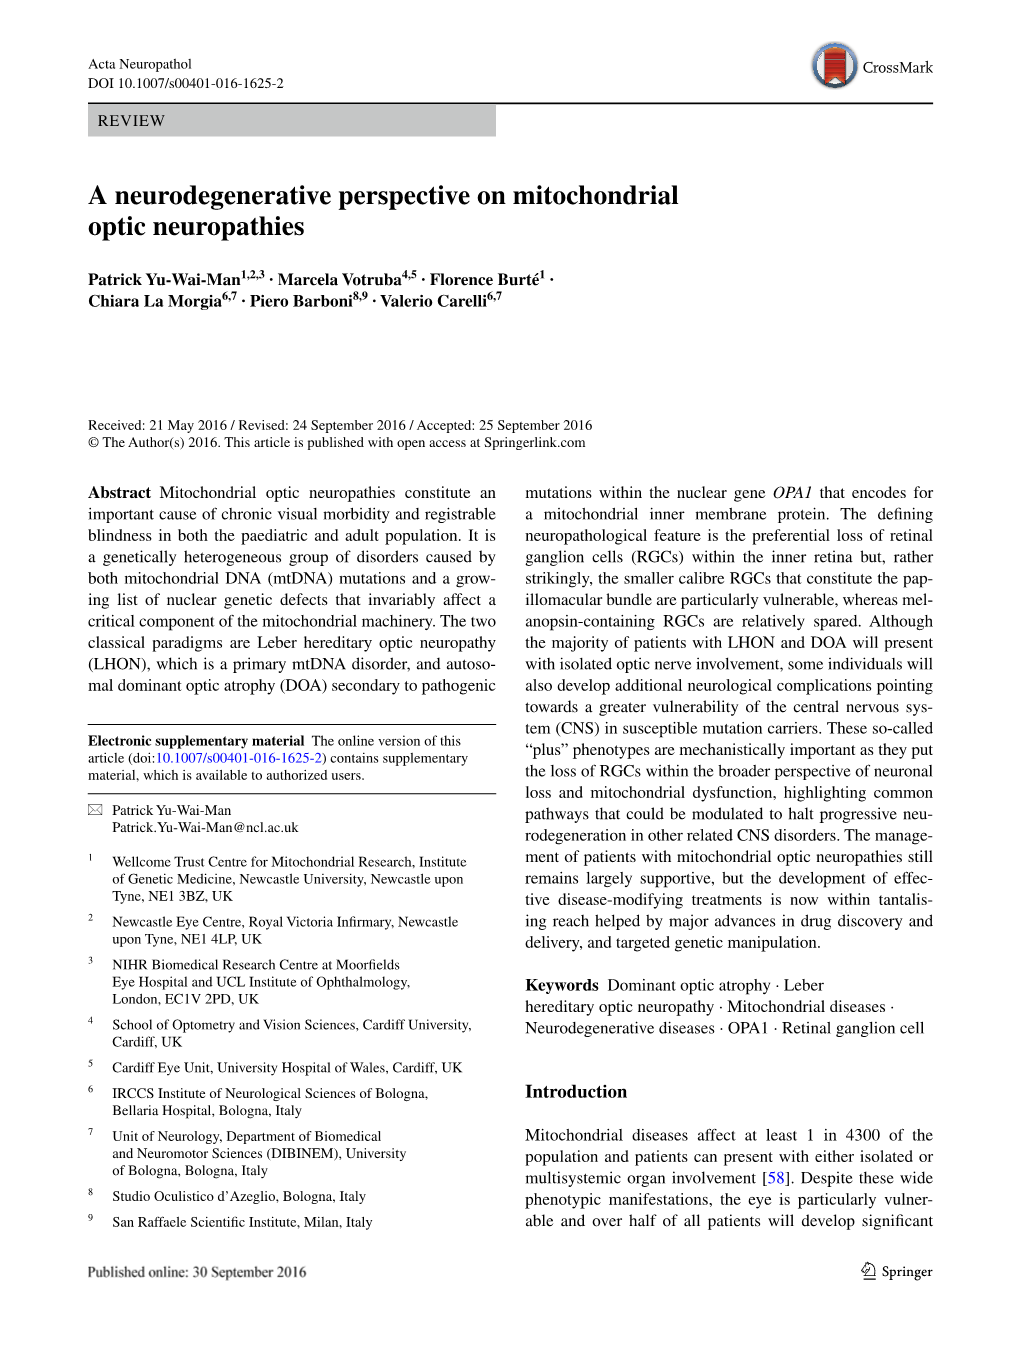 A Neurodegenerative Perspective on Mitochondrial Optic Neuropathies